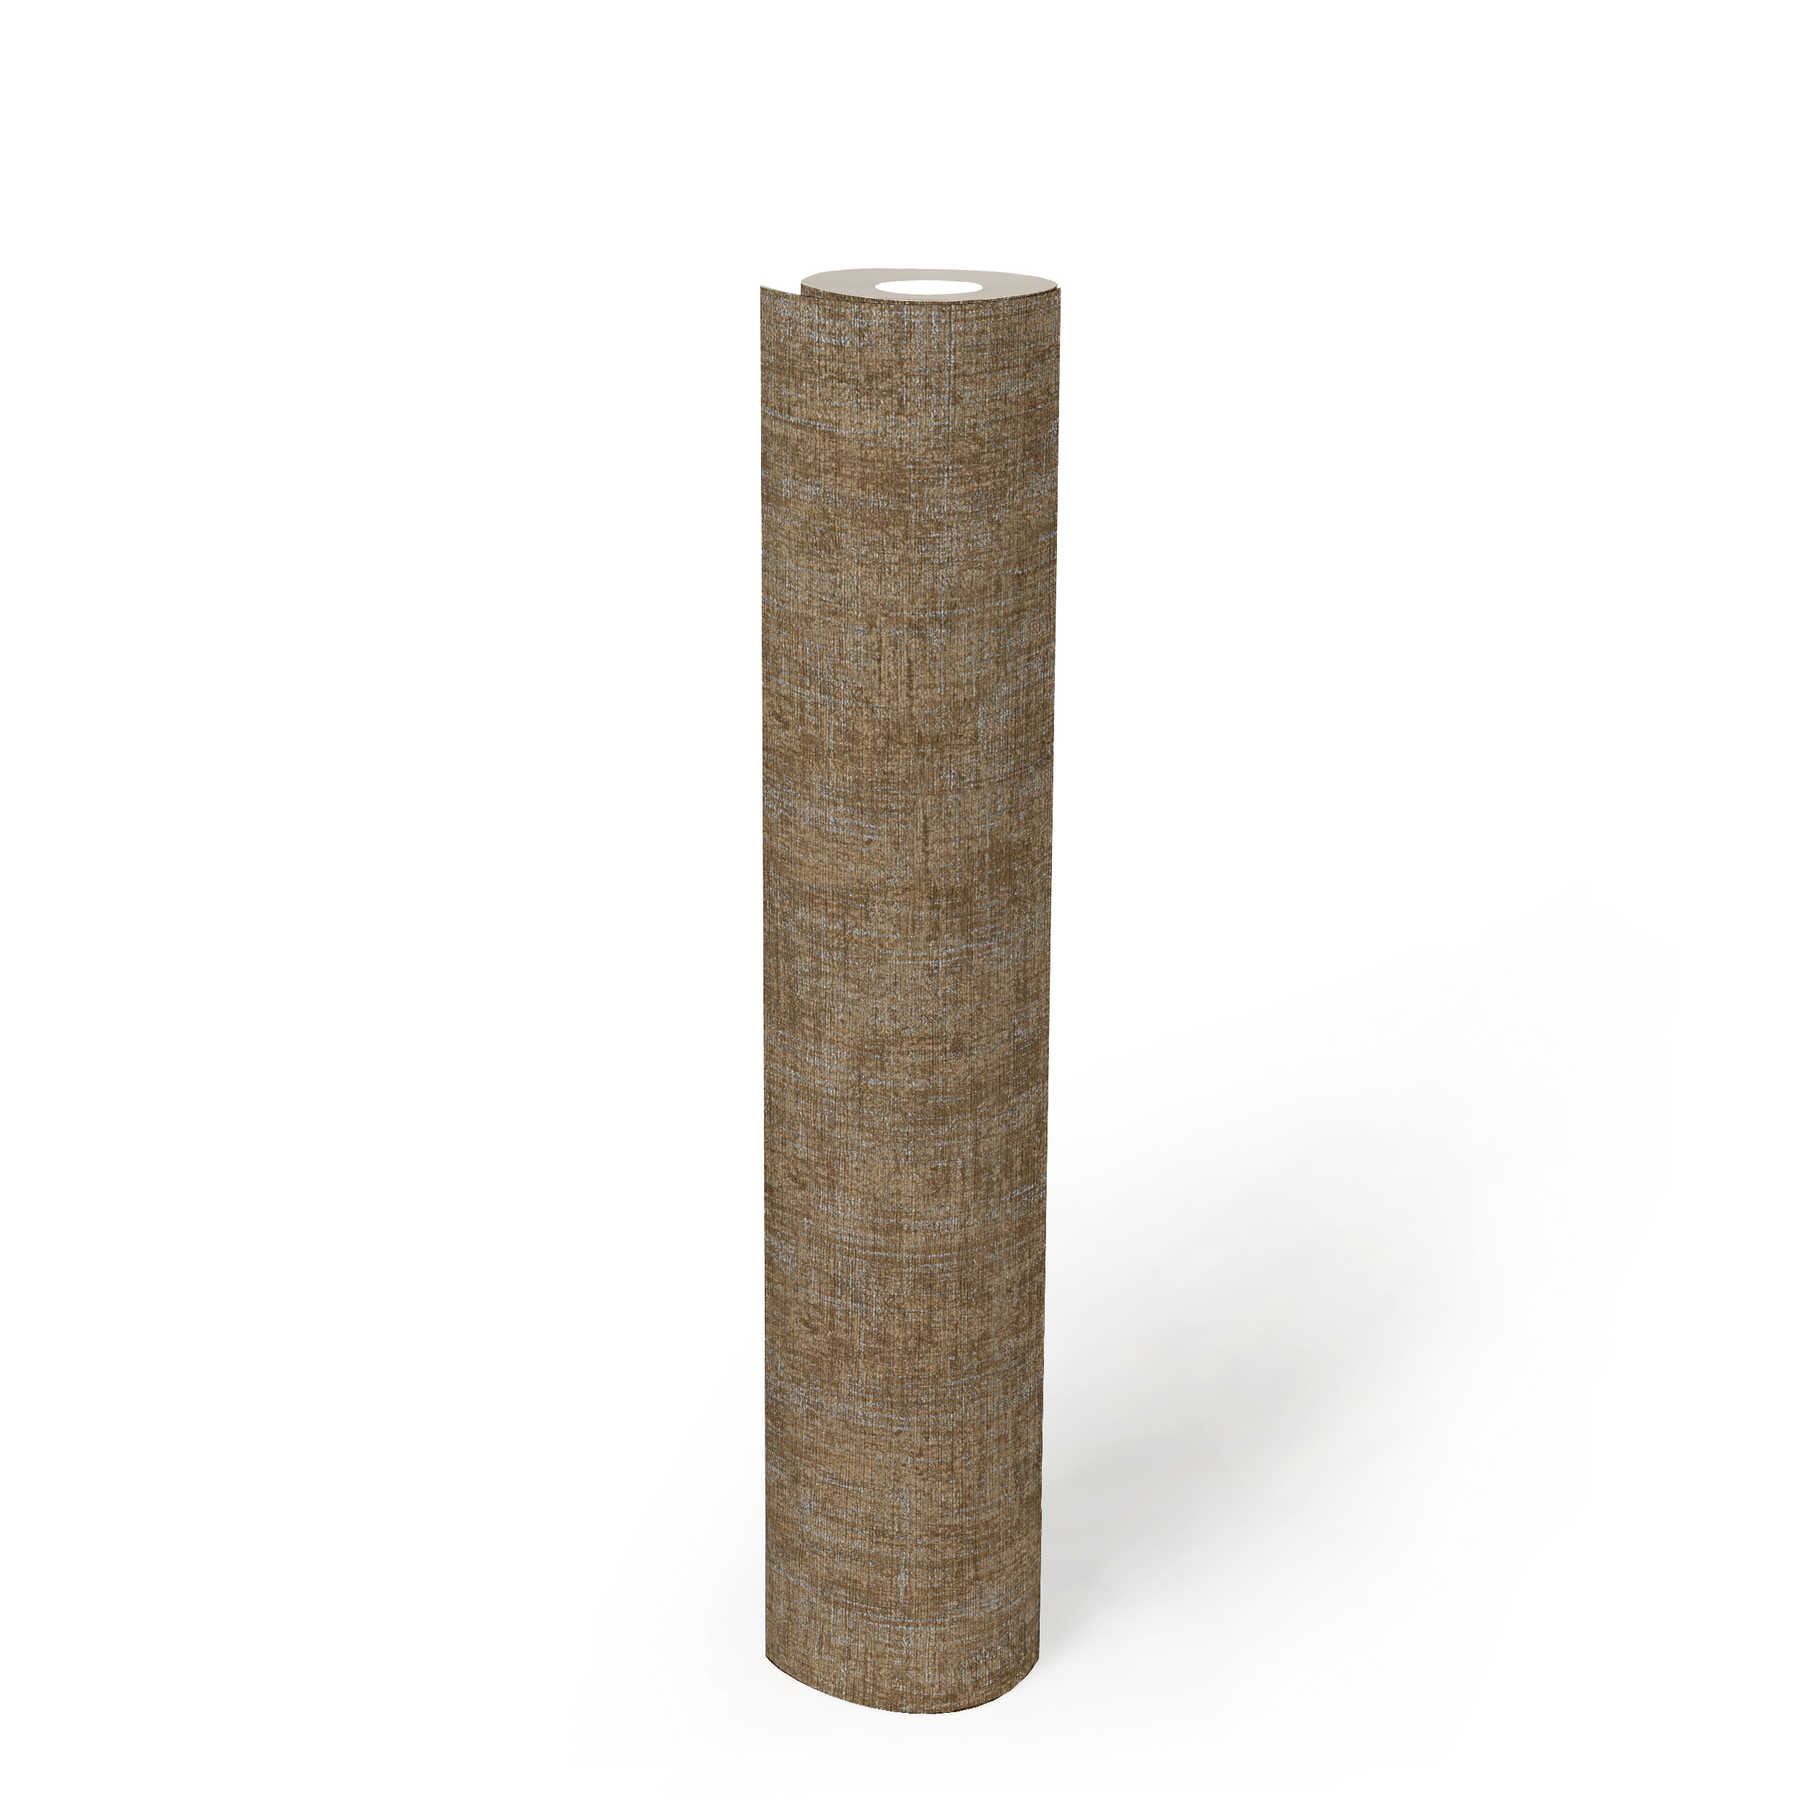             wallpaper brown mottled with silver accents & wood texture
        